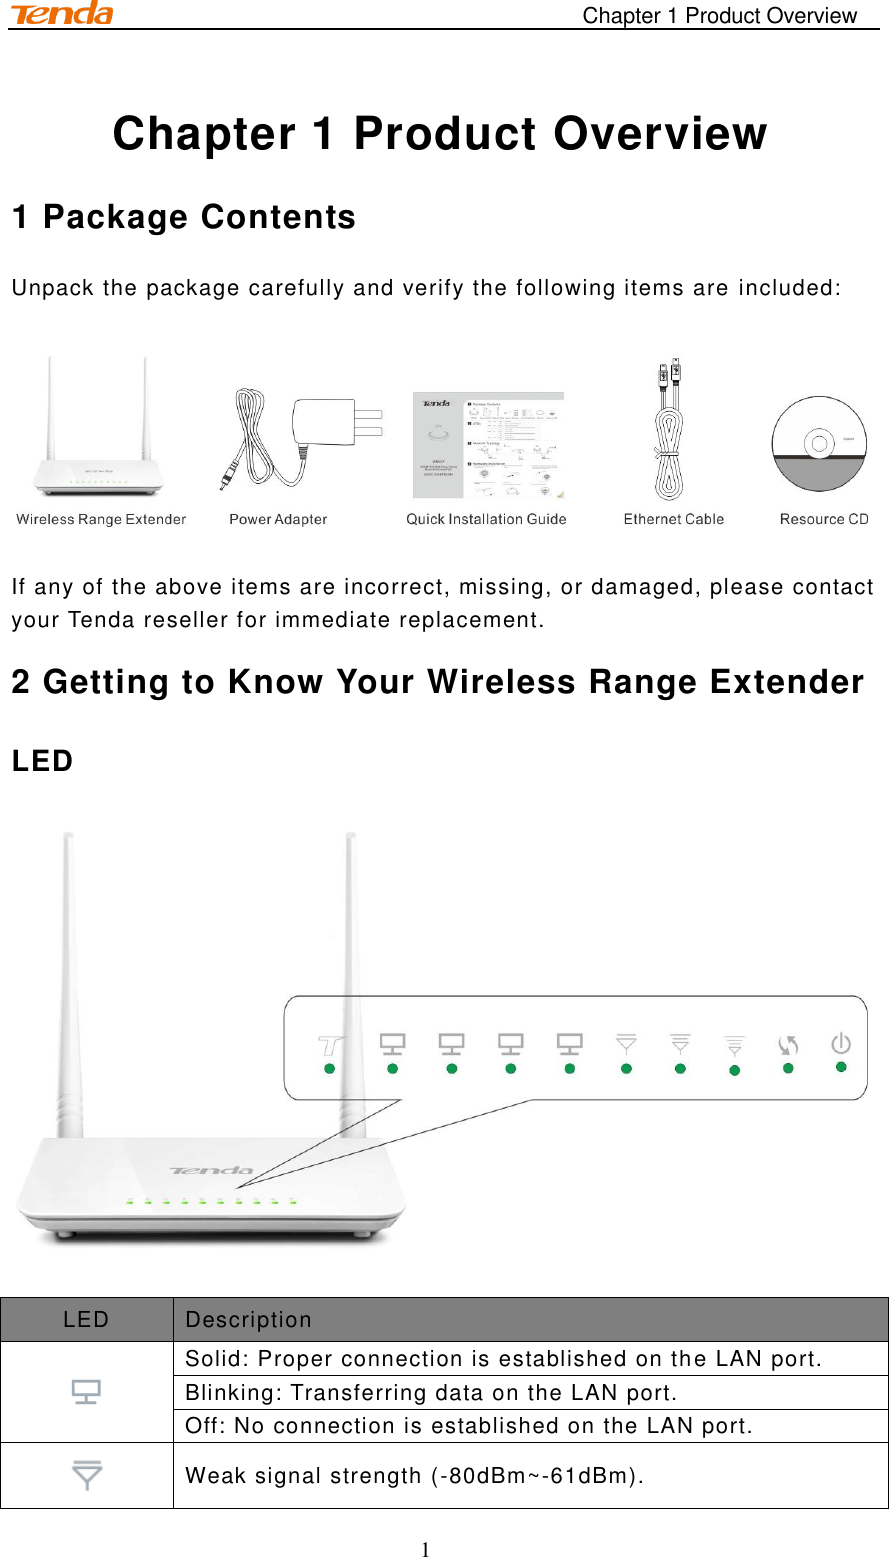                                                                                       Chapter 1 Product Overview 1 Chapter 1 Product Overview 1 Package Contents Unpack the package carefully and verify the following items are included:    If any of the above items are incorrect, missing, or damaged, please contact your Tenda reseller for immediate replacement. 2 Getting to Know Your Wireless Range Extender LED   LED Description  Solid: Proper connection is established on the LAN port. Blinking: Transferring data on the LAN port.  Off: No connection is established on the LAN port.   Weak signal strength (-80dBm~-61dBm). 